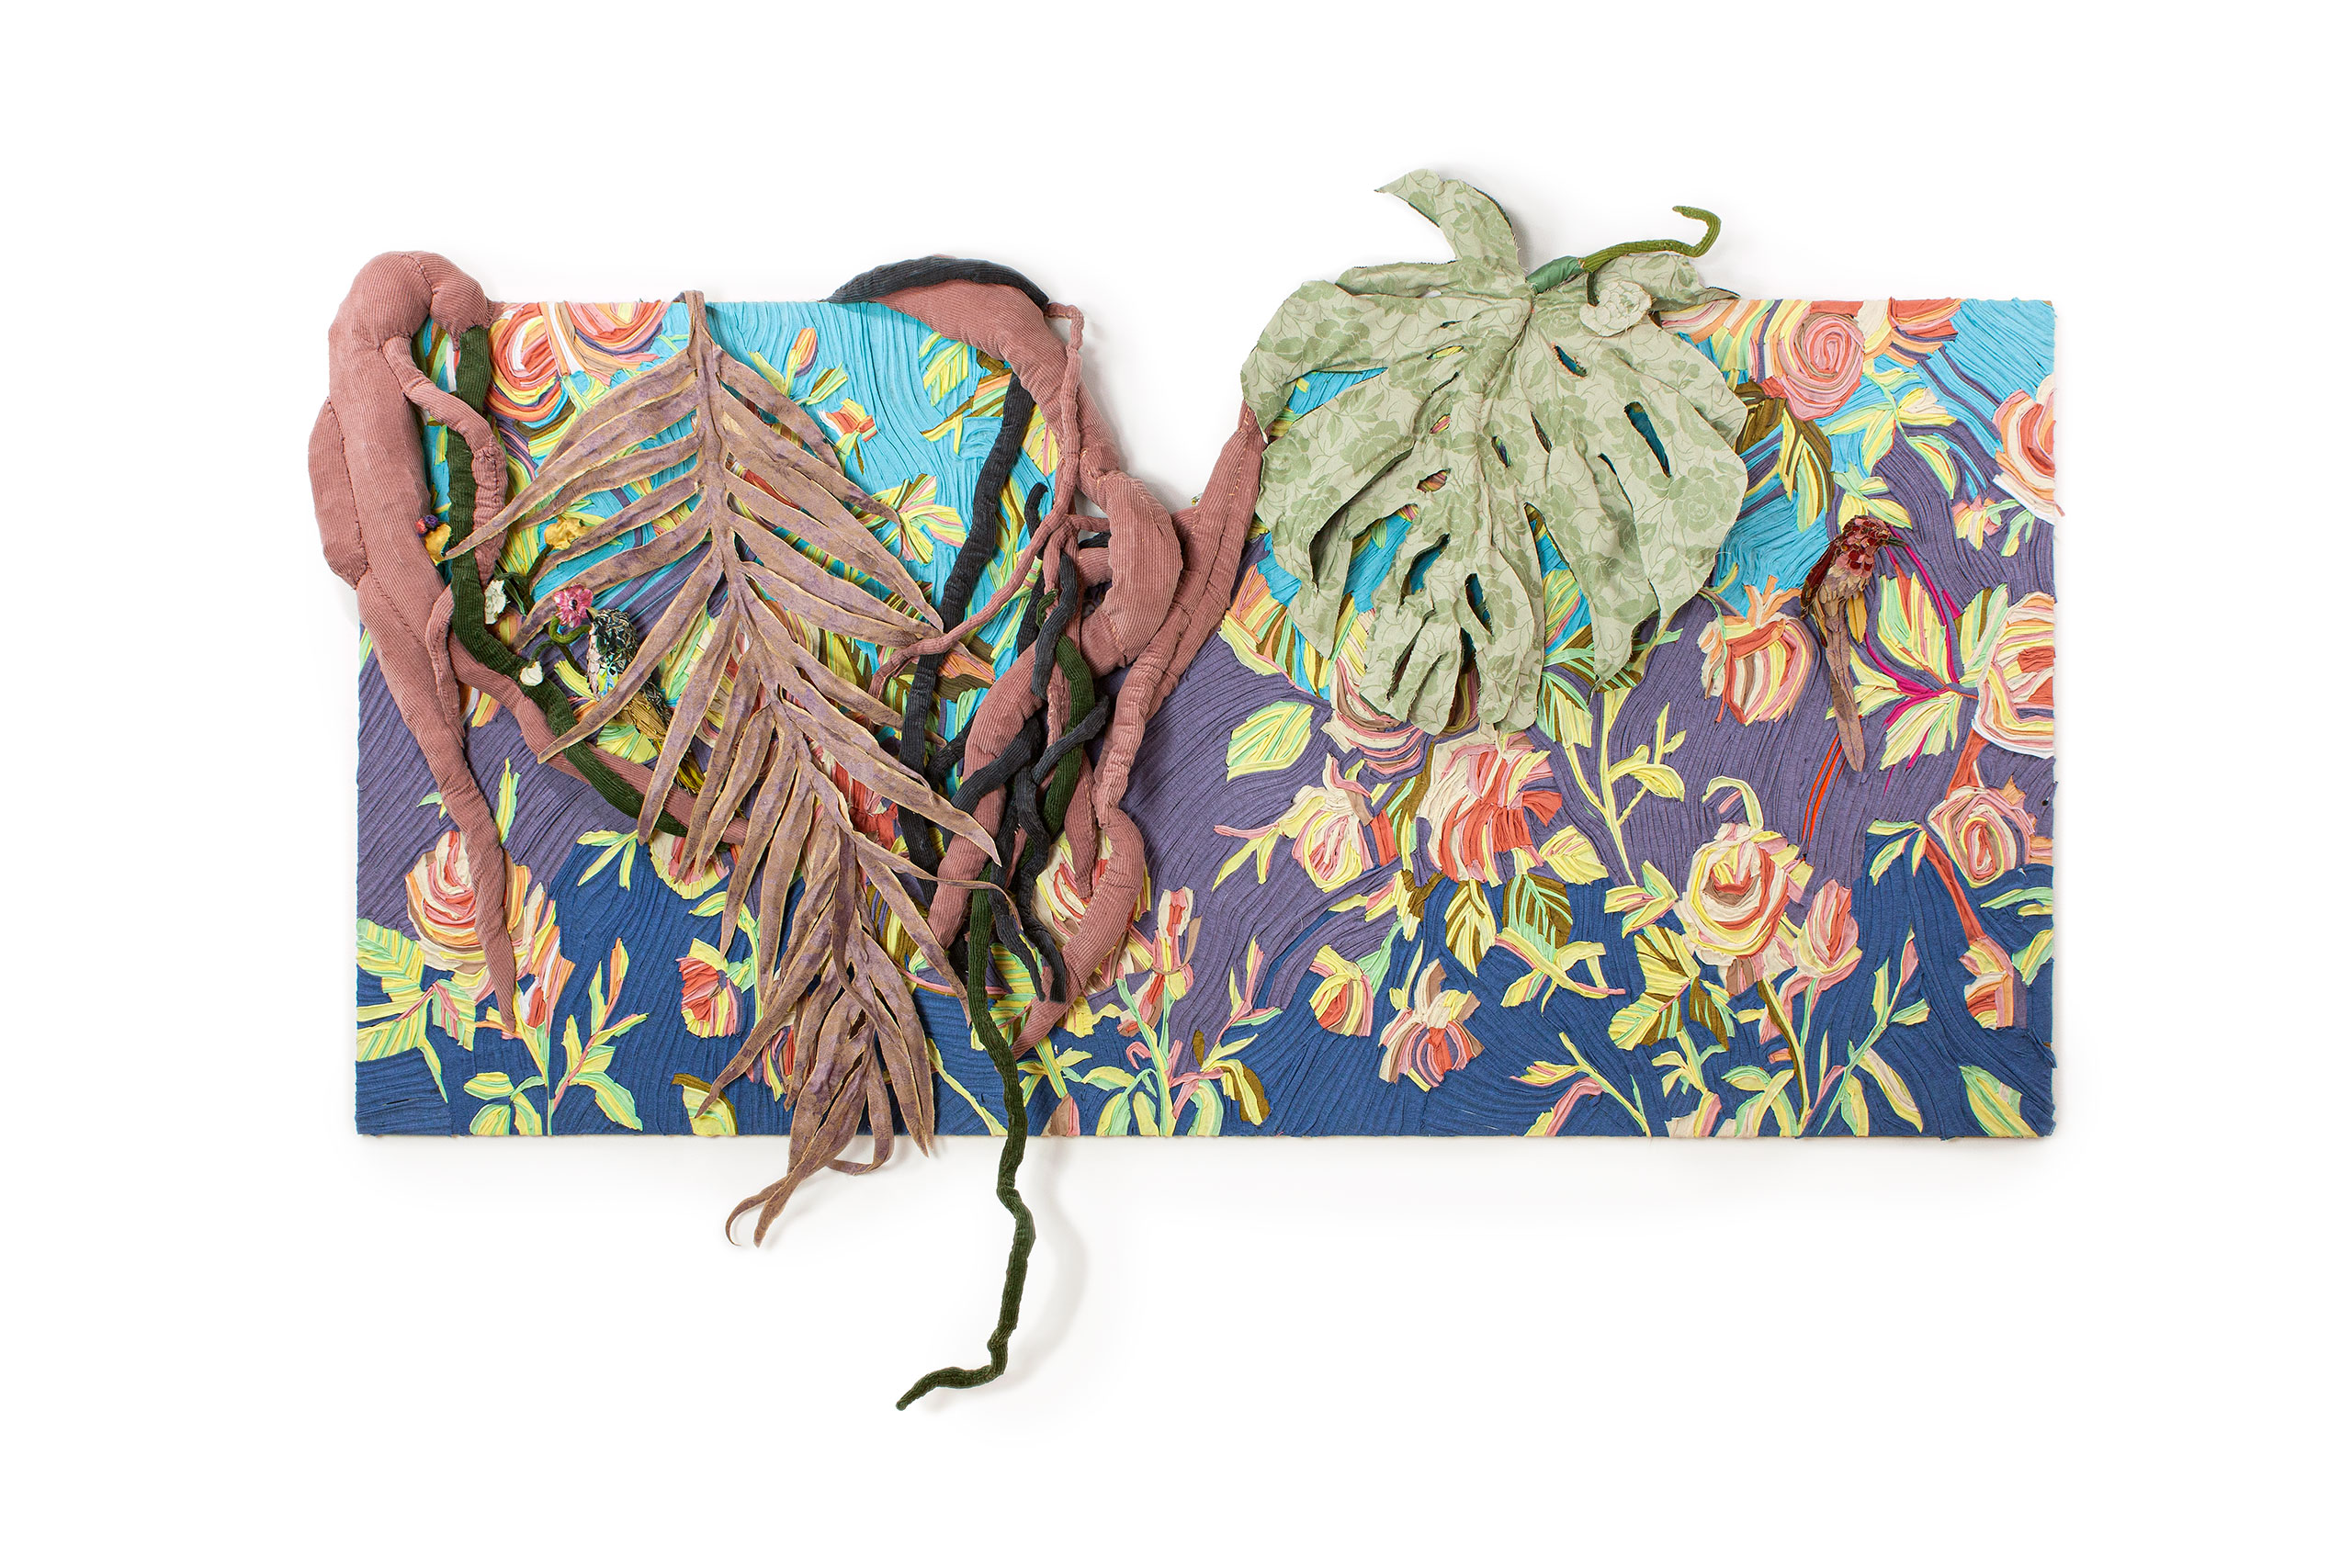 Tamara Kostianovsky, Textile Jungle, 2022. Discarded Textiles on Wood. 96 x 56 x 6 in. Courtesy of Slag Gallery and Artist